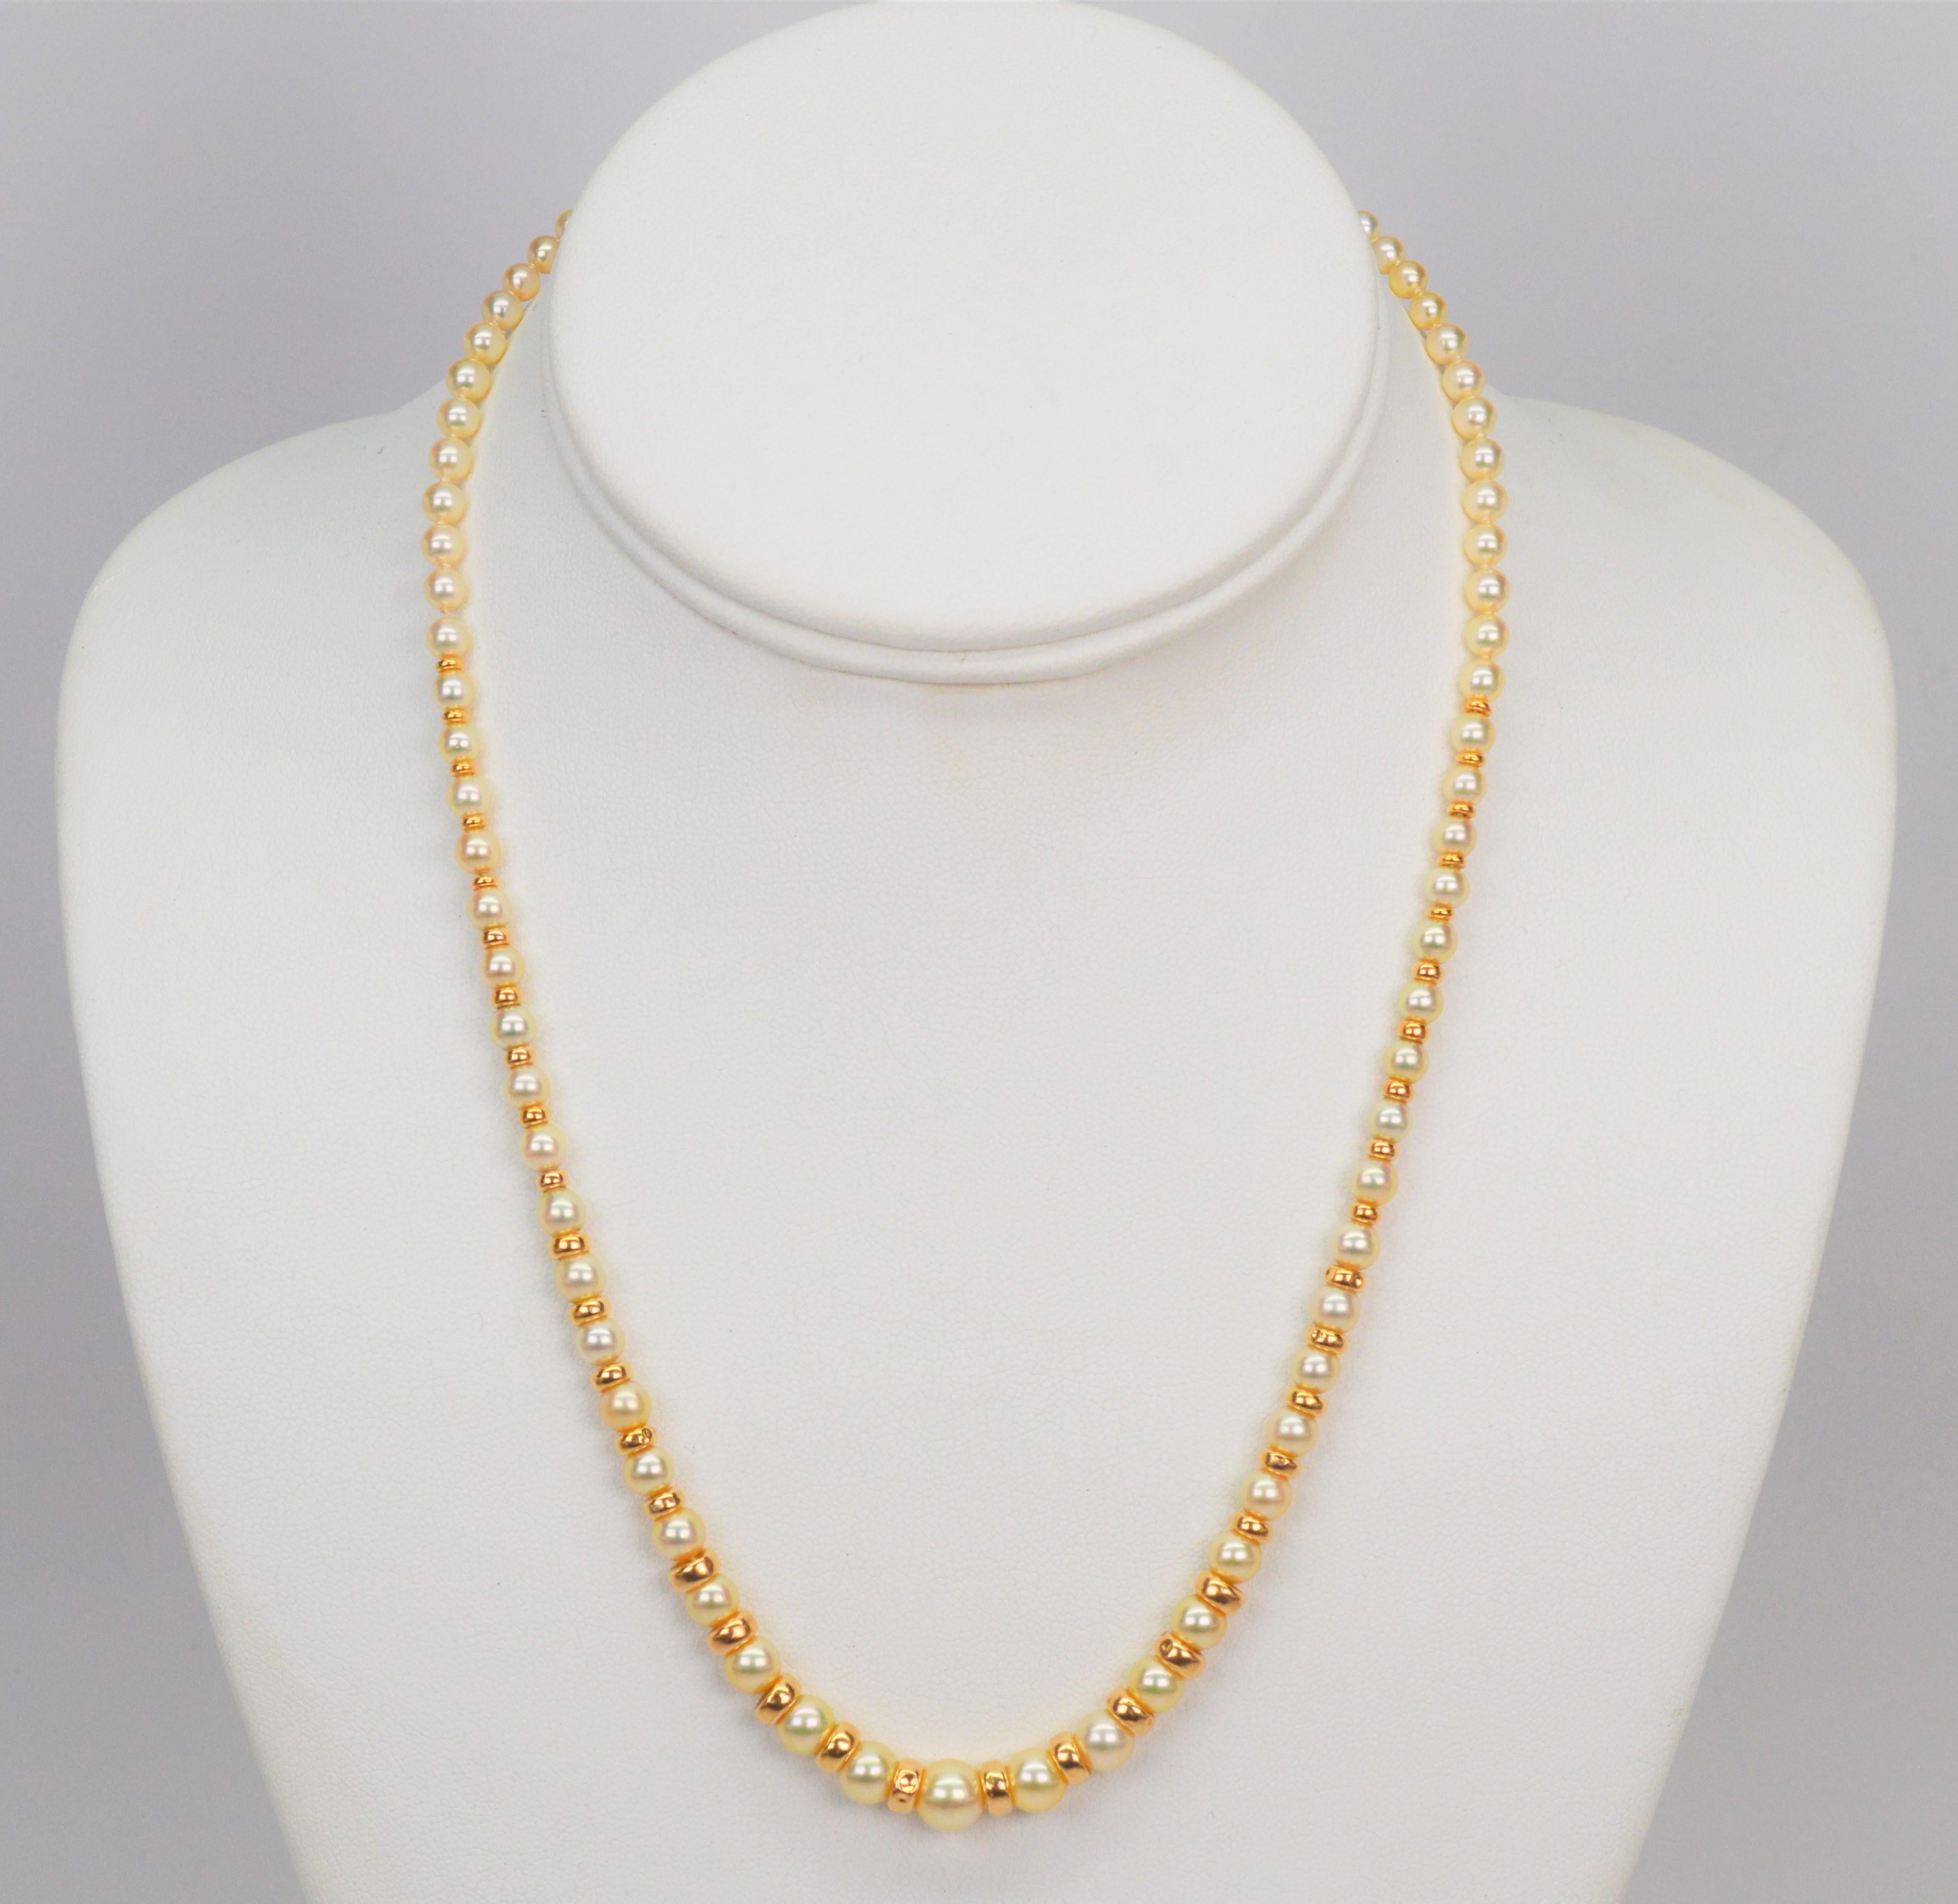 Creamy AA Akoya Pearls ranging from 3.5mm to 7mm are hand strung with alternating fourteen karat 14k yellow gold spacers giving this classic necklace a rich warm tone.
Eighteen inches in length, the pearls with beads smoothly graduate to the center